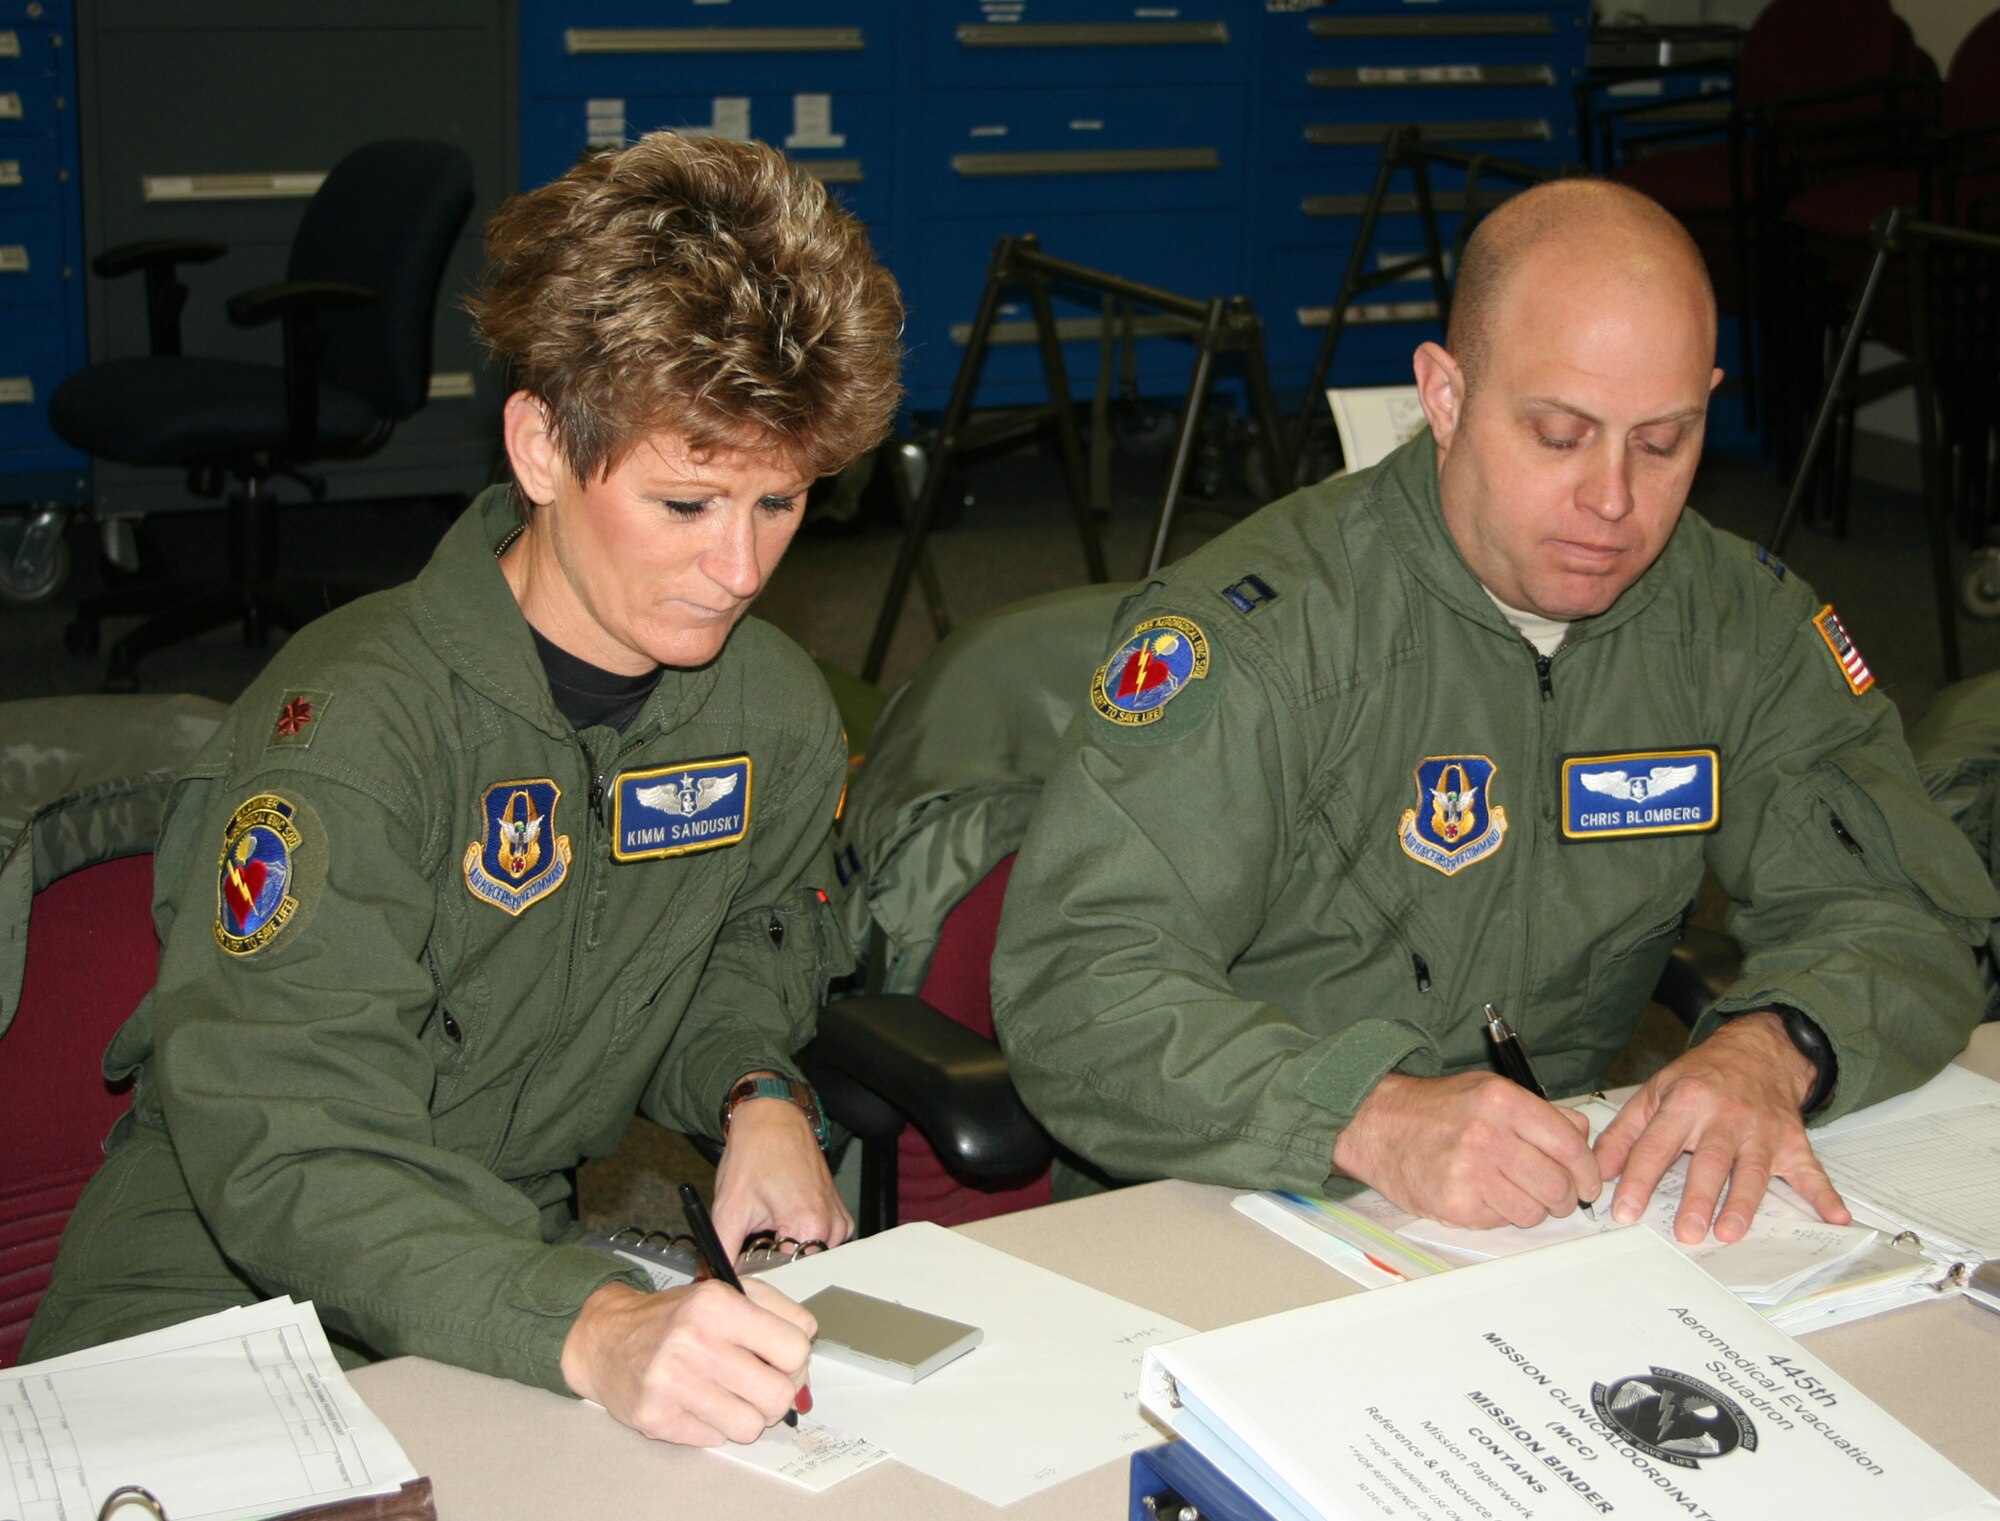 WRIGHT-PATTERSON AIR FORCE BASE, Ohio – Maj. Kimberlee Sandusky and Capt. Christopher Blomberg, both from the 445th Aeromedical Evacuation Squadron, write down patient information during a crew mission briefing before an AES training flight Dec. 16. Members of the 445th AES are ready to fill the need when events like natural disasters, war or routine medical transportation by air is required. (U.S. Air Force photo/Senior Airman Matthew Cook)